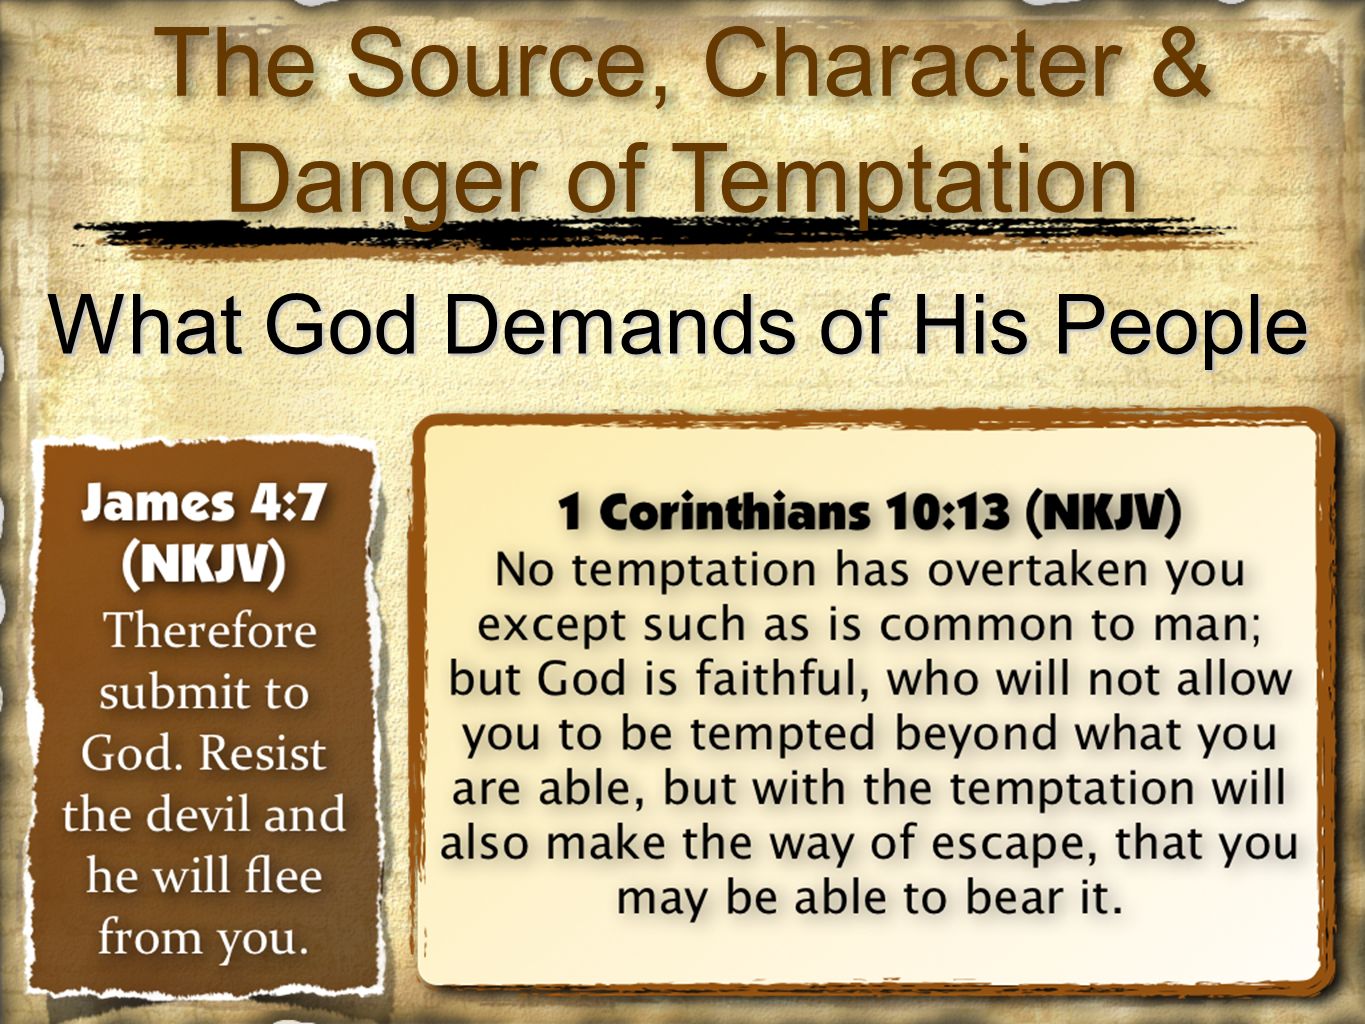 What God Demands of His People The Source, Character & Danger of Temptation